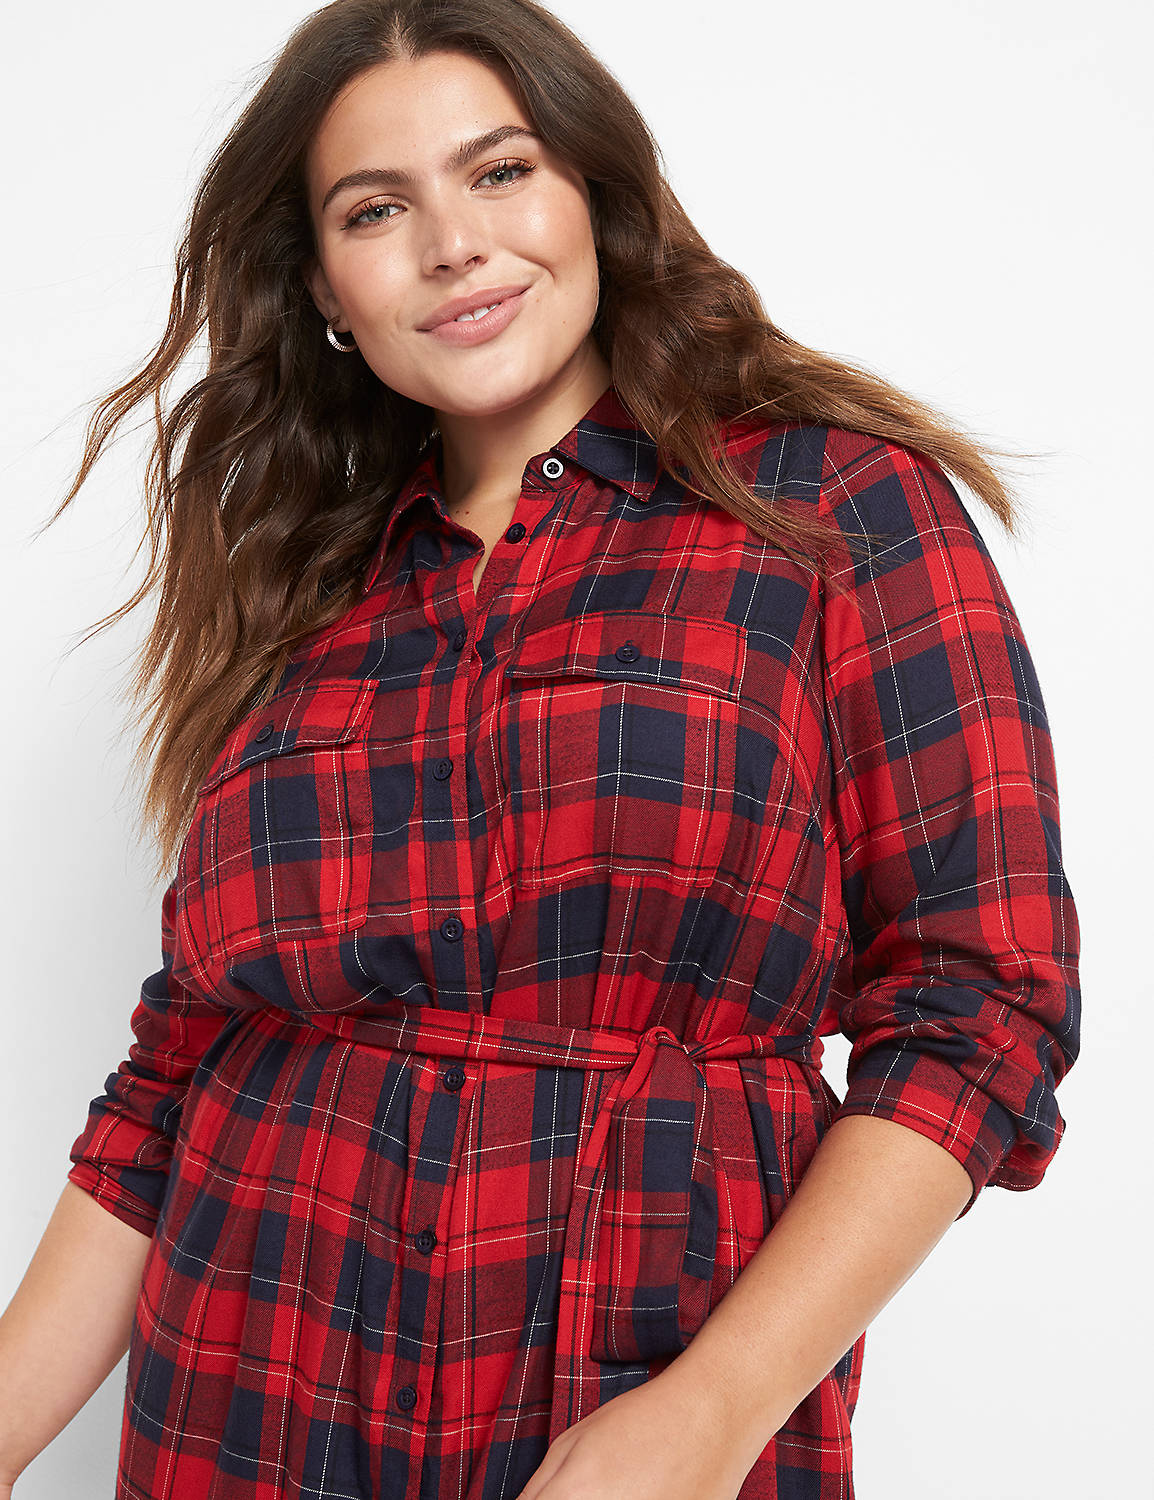 Long Sleeve Button Down Belted Shirt Dress 1124664:LBH21071_IcelandPlaid_CW14:20 Product Image 3